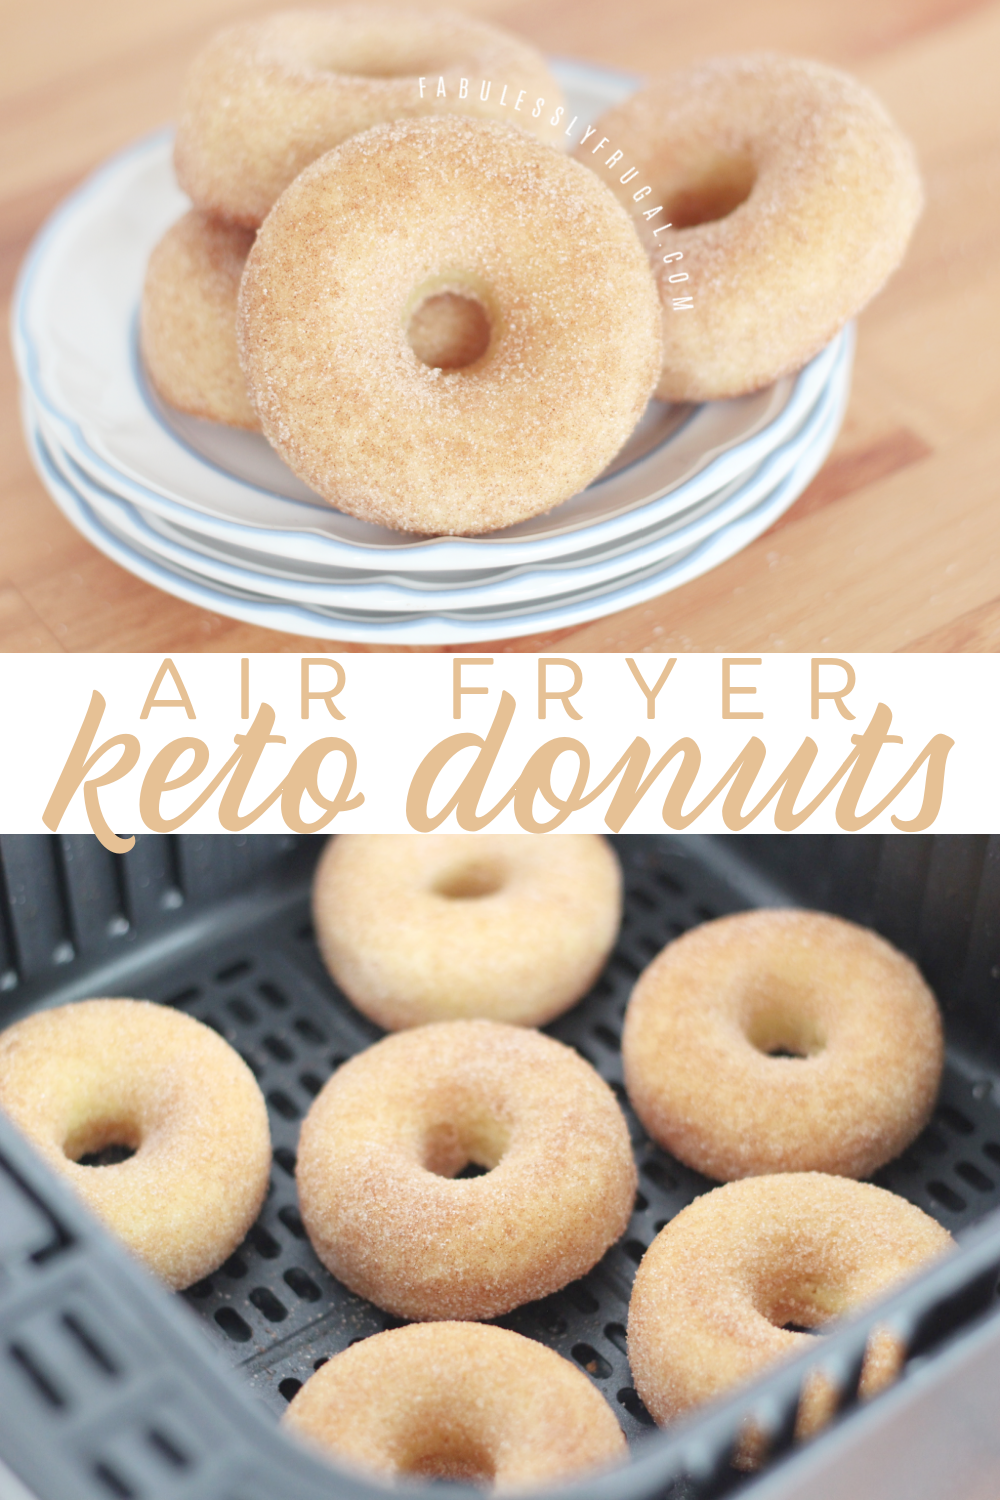 how to make keto donuts in air fryer